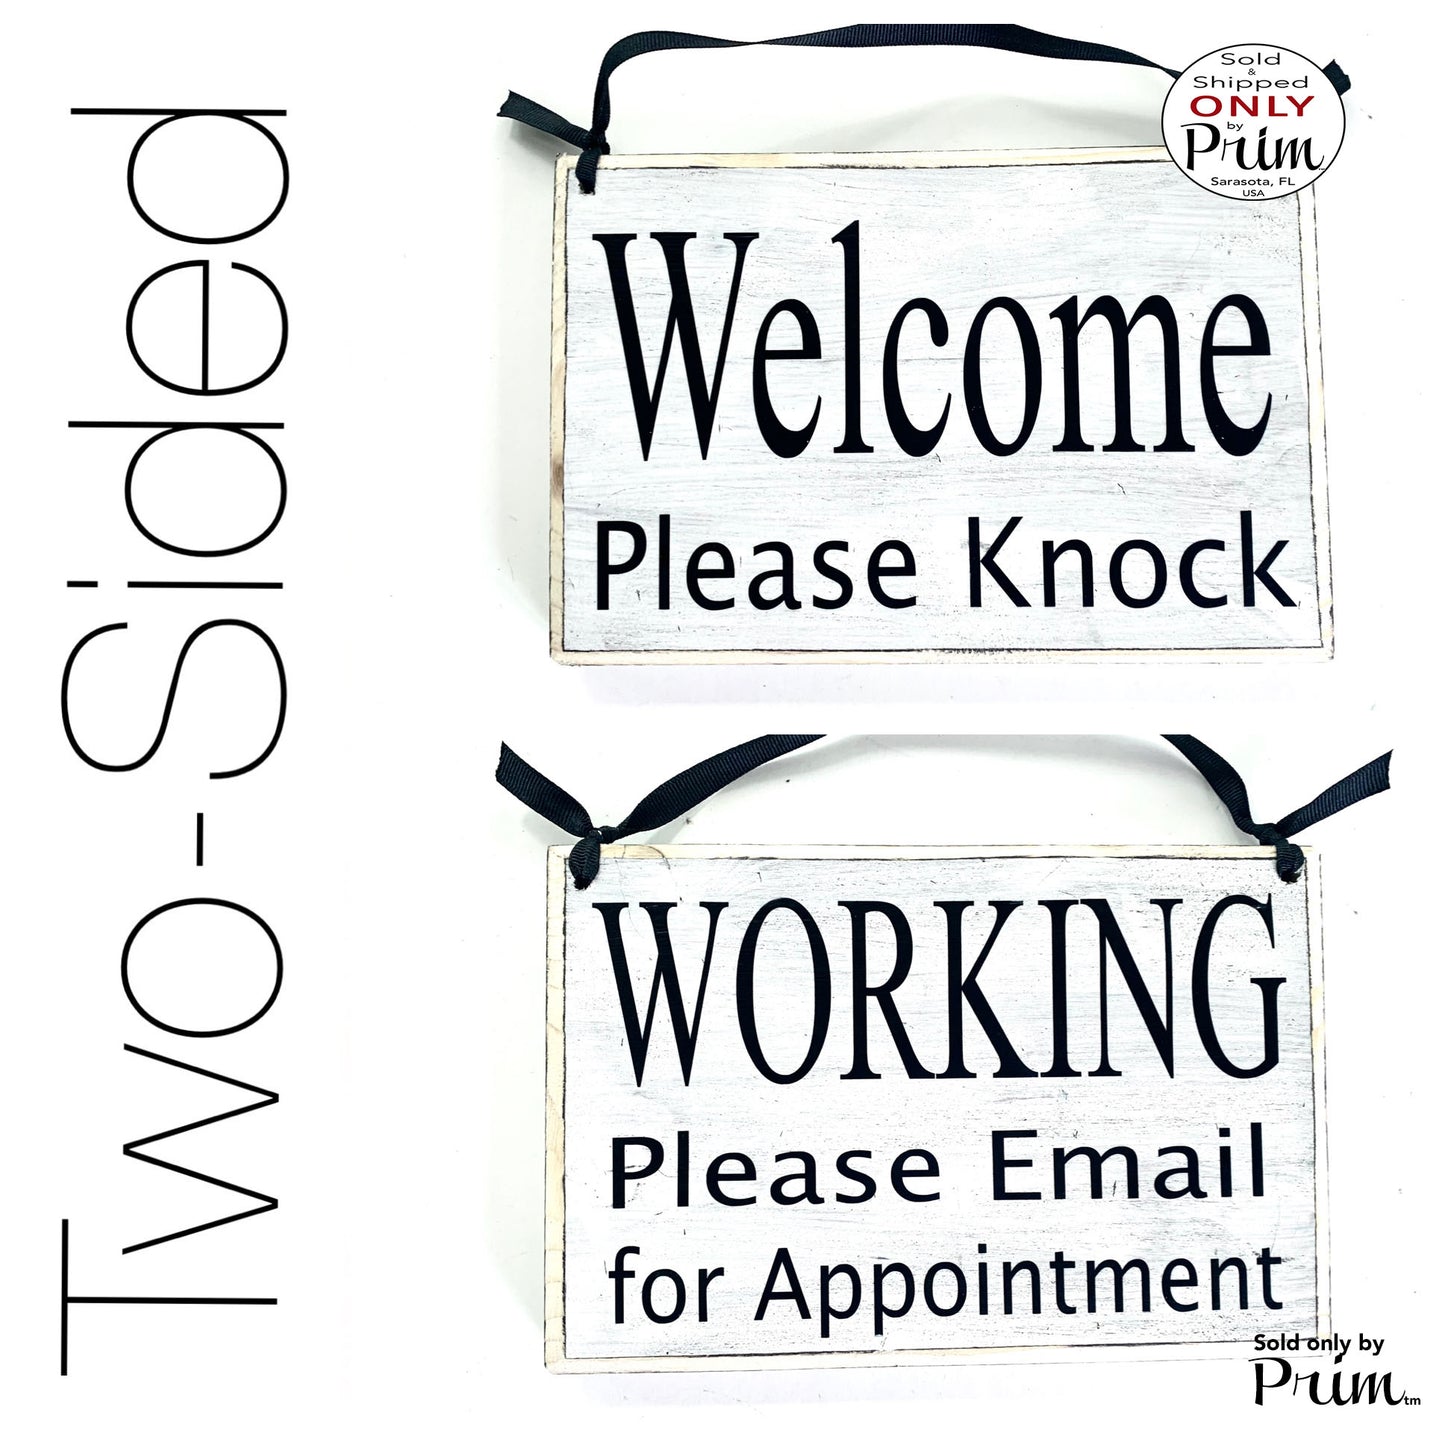 Two Sided 8x6 Welcome Please Knock Working Please Email for Appointment Custom Wood Sign Do Not Disturb Busy Meeting Office Door Hanger Designs by Prim